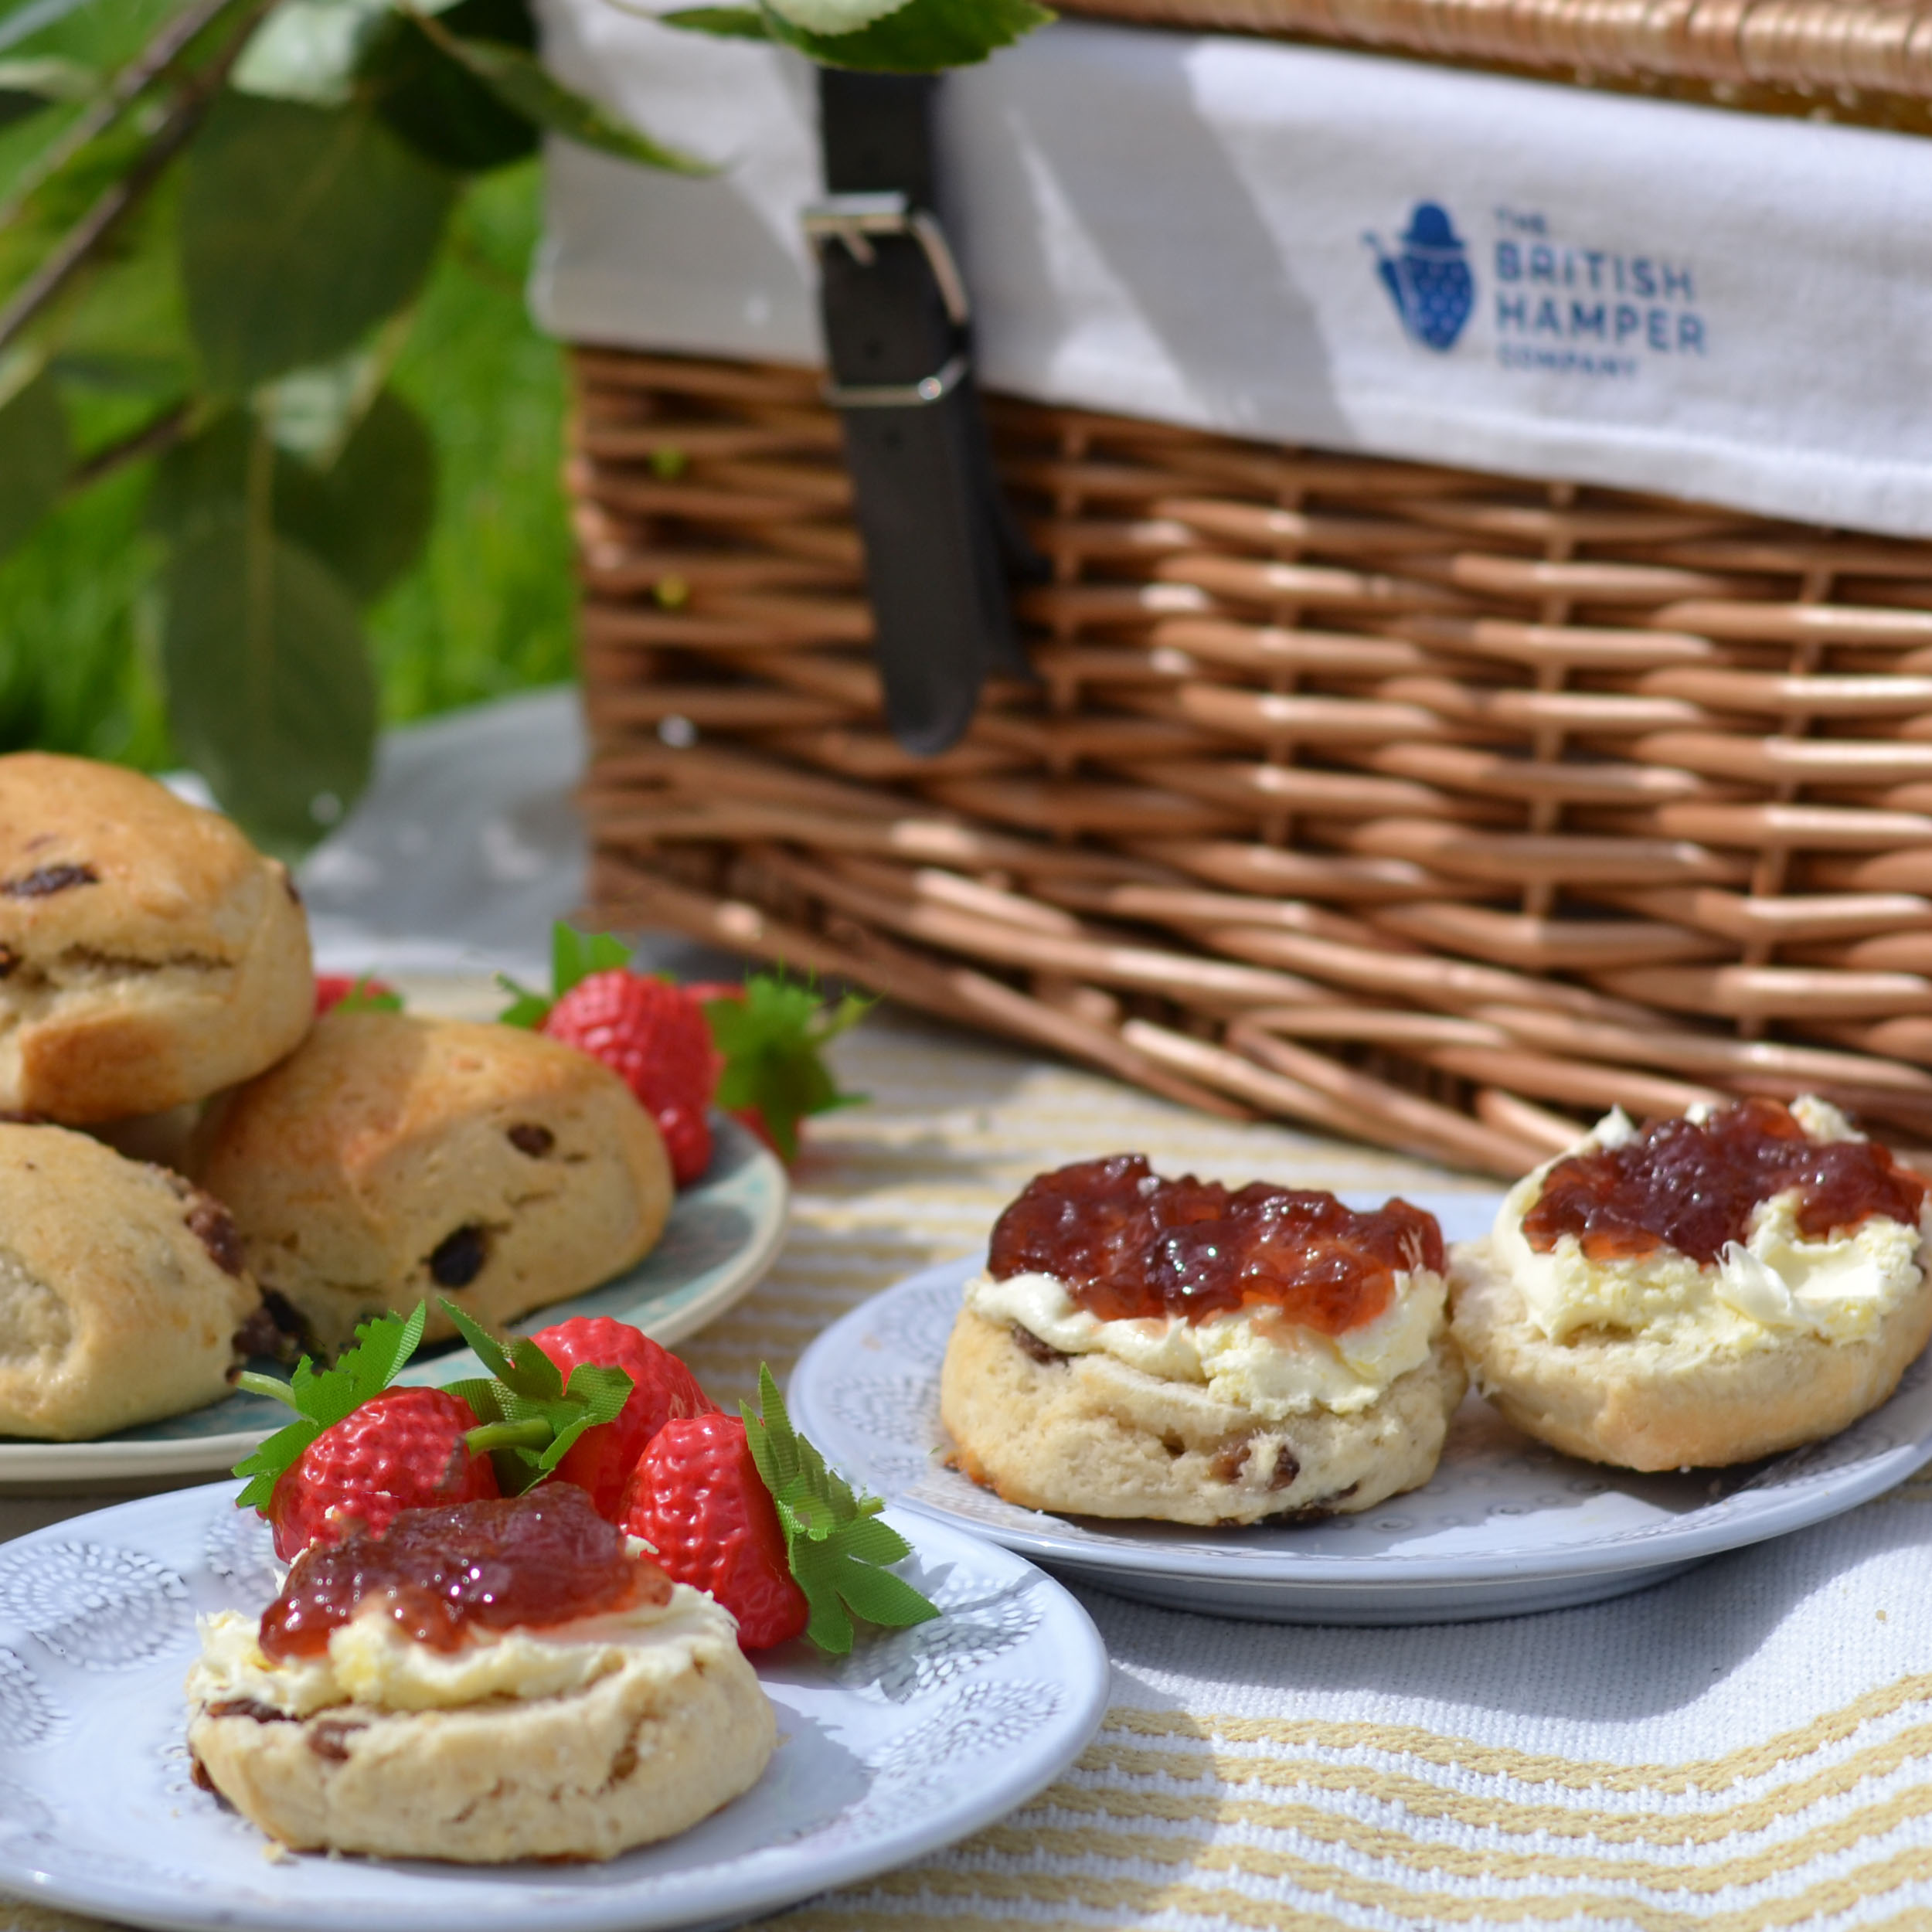 Scones and Jam picnic by The British Hamper Company